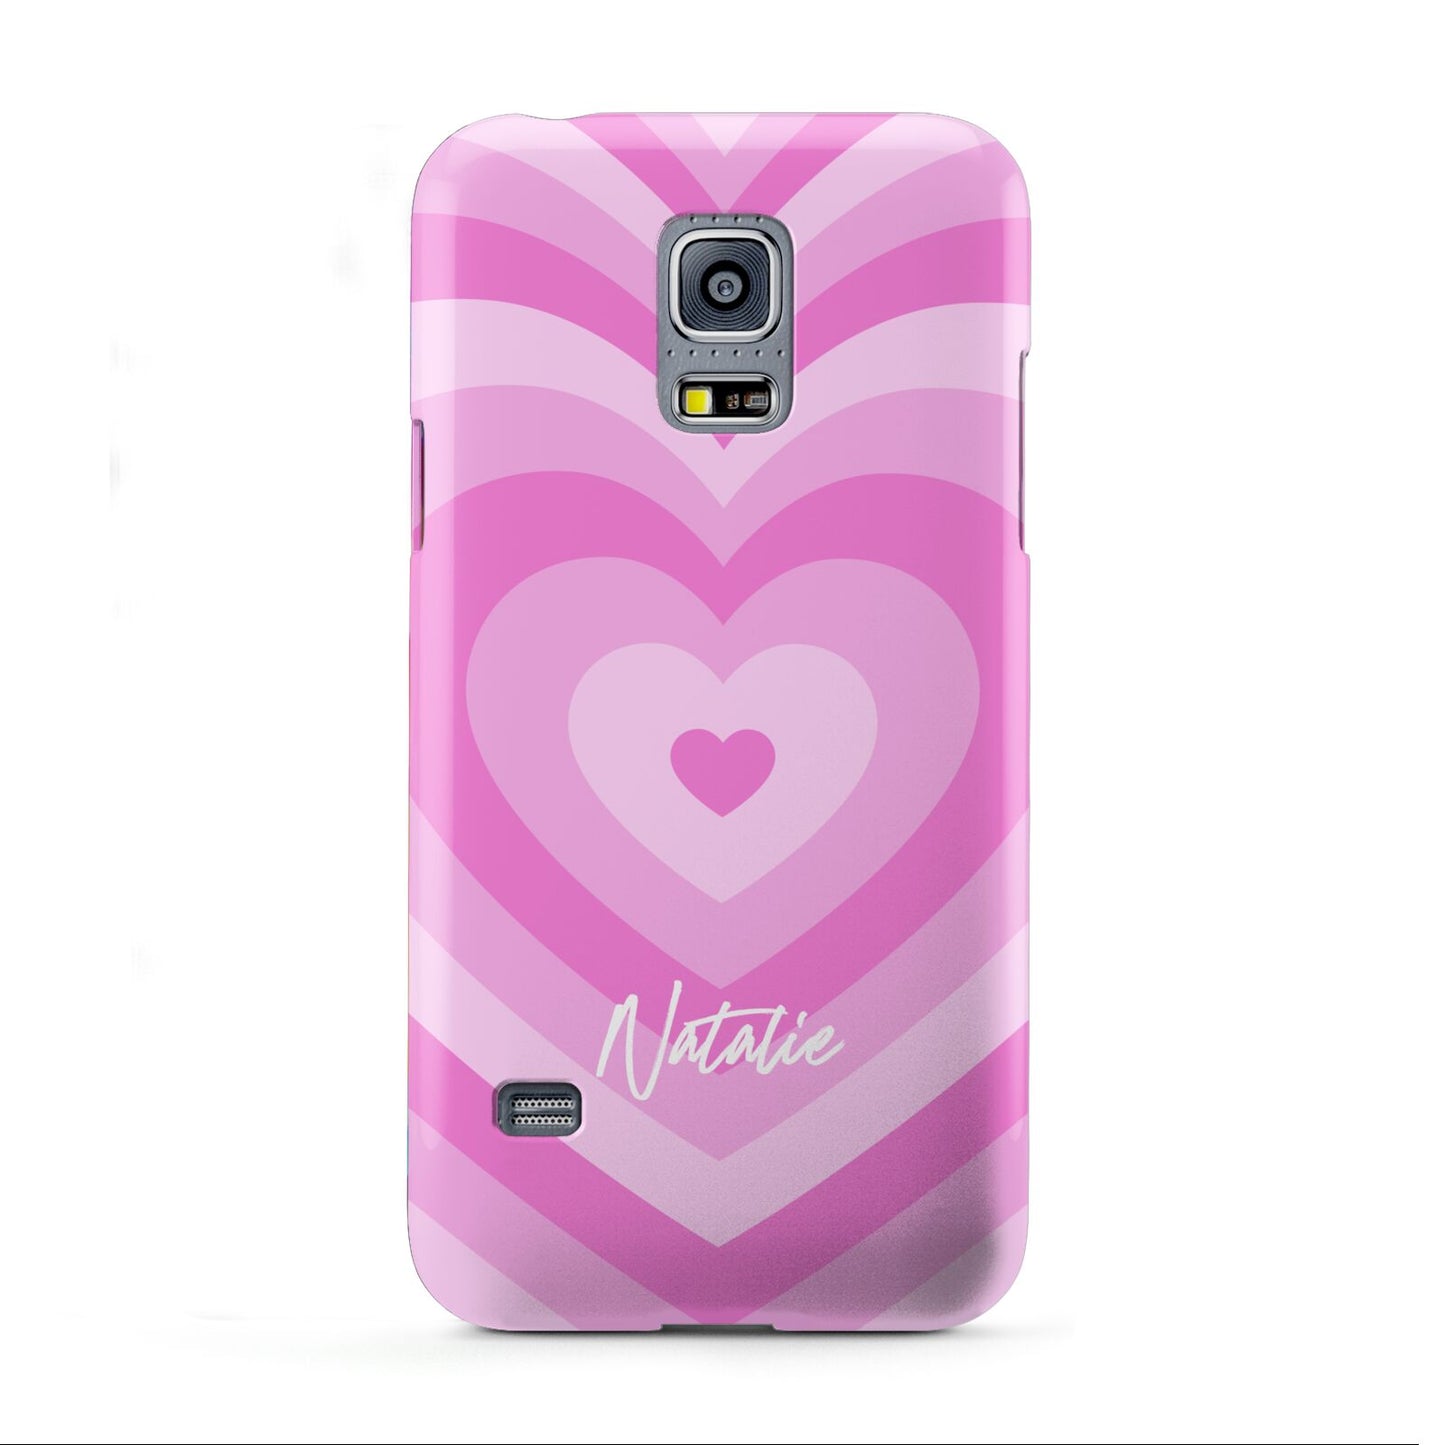 Personalised Pink Heart Samsung Galaxy S5 Mini Case